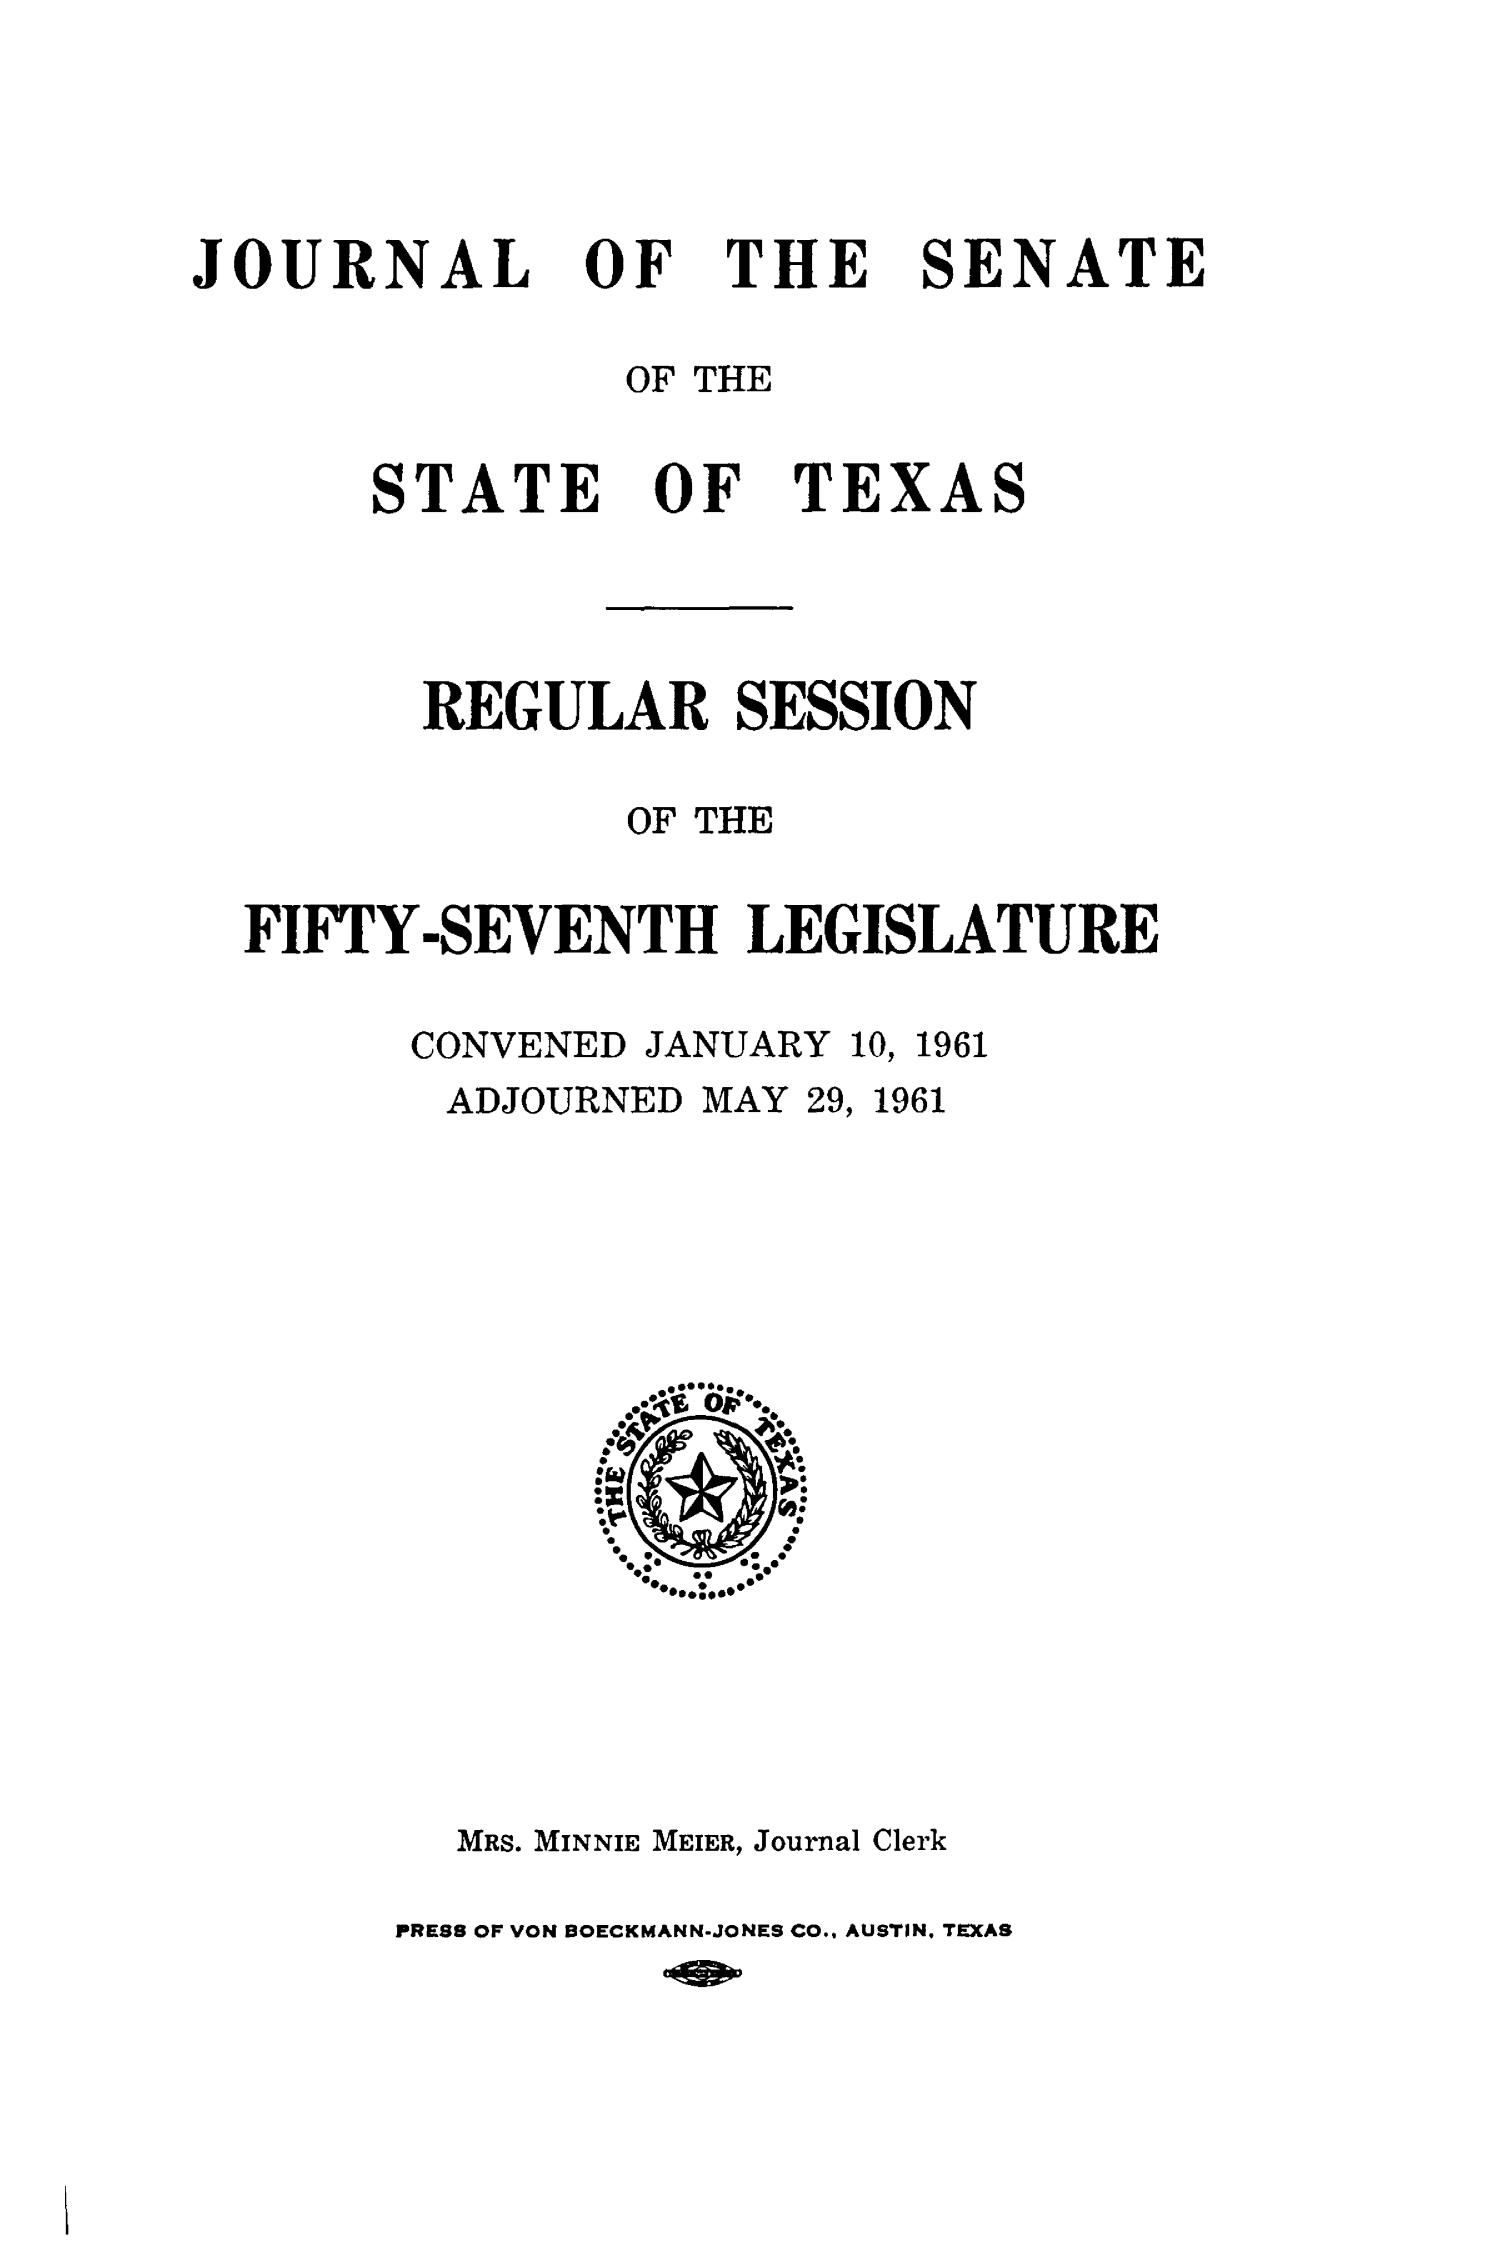 Journal of the Senate of the State of Texas, Regular Session of the Fifty-Seventh Legislature
                                                
                                                    Title Page
                                                